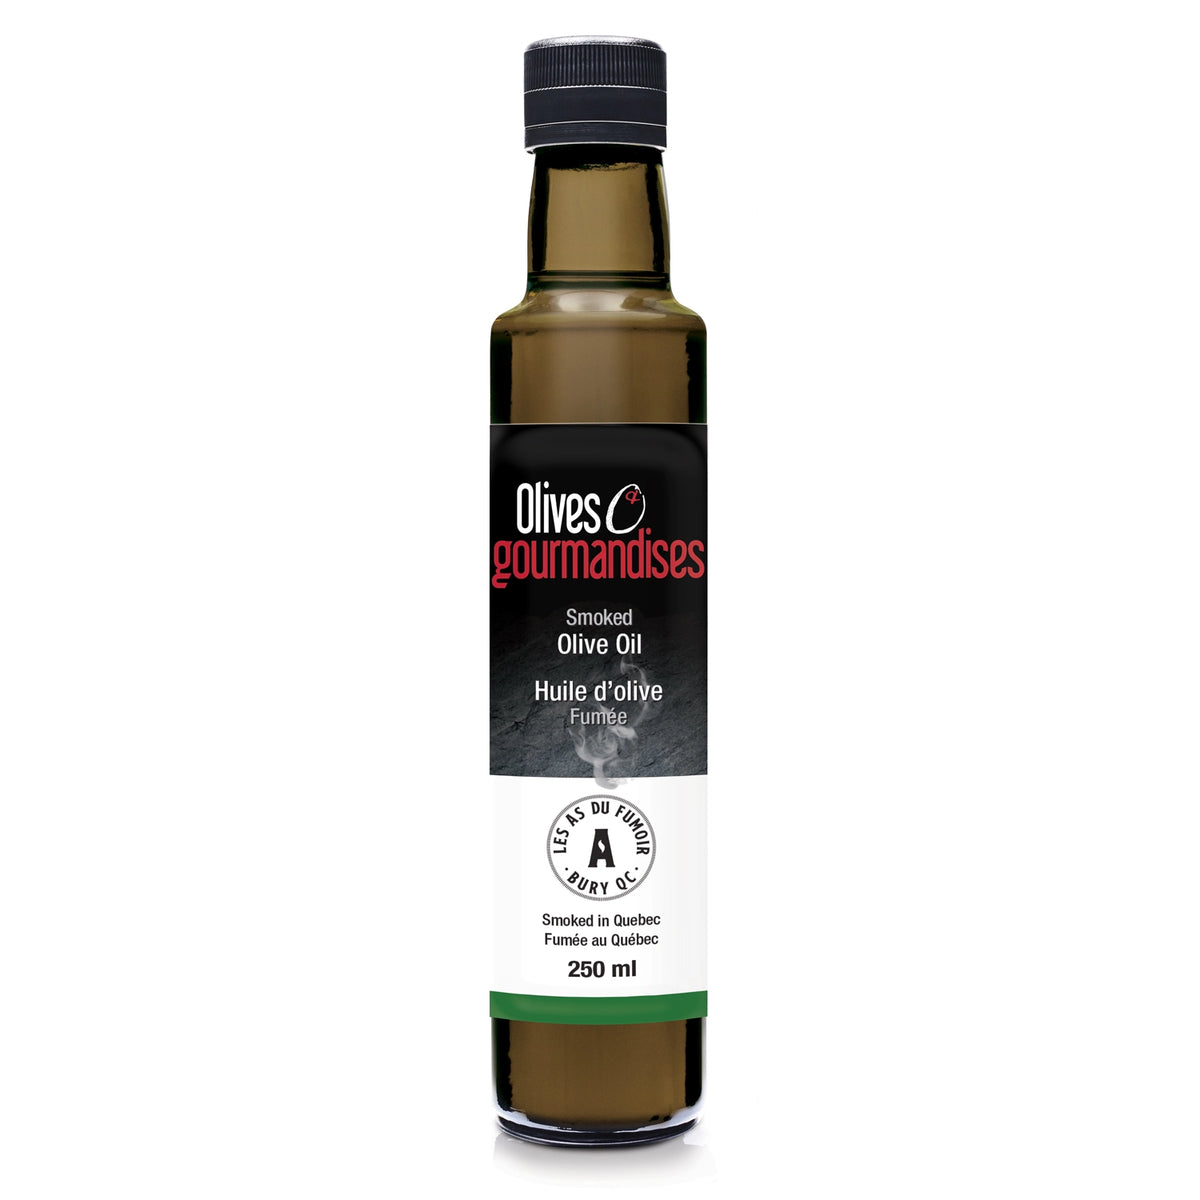 Smoked – Olive oil